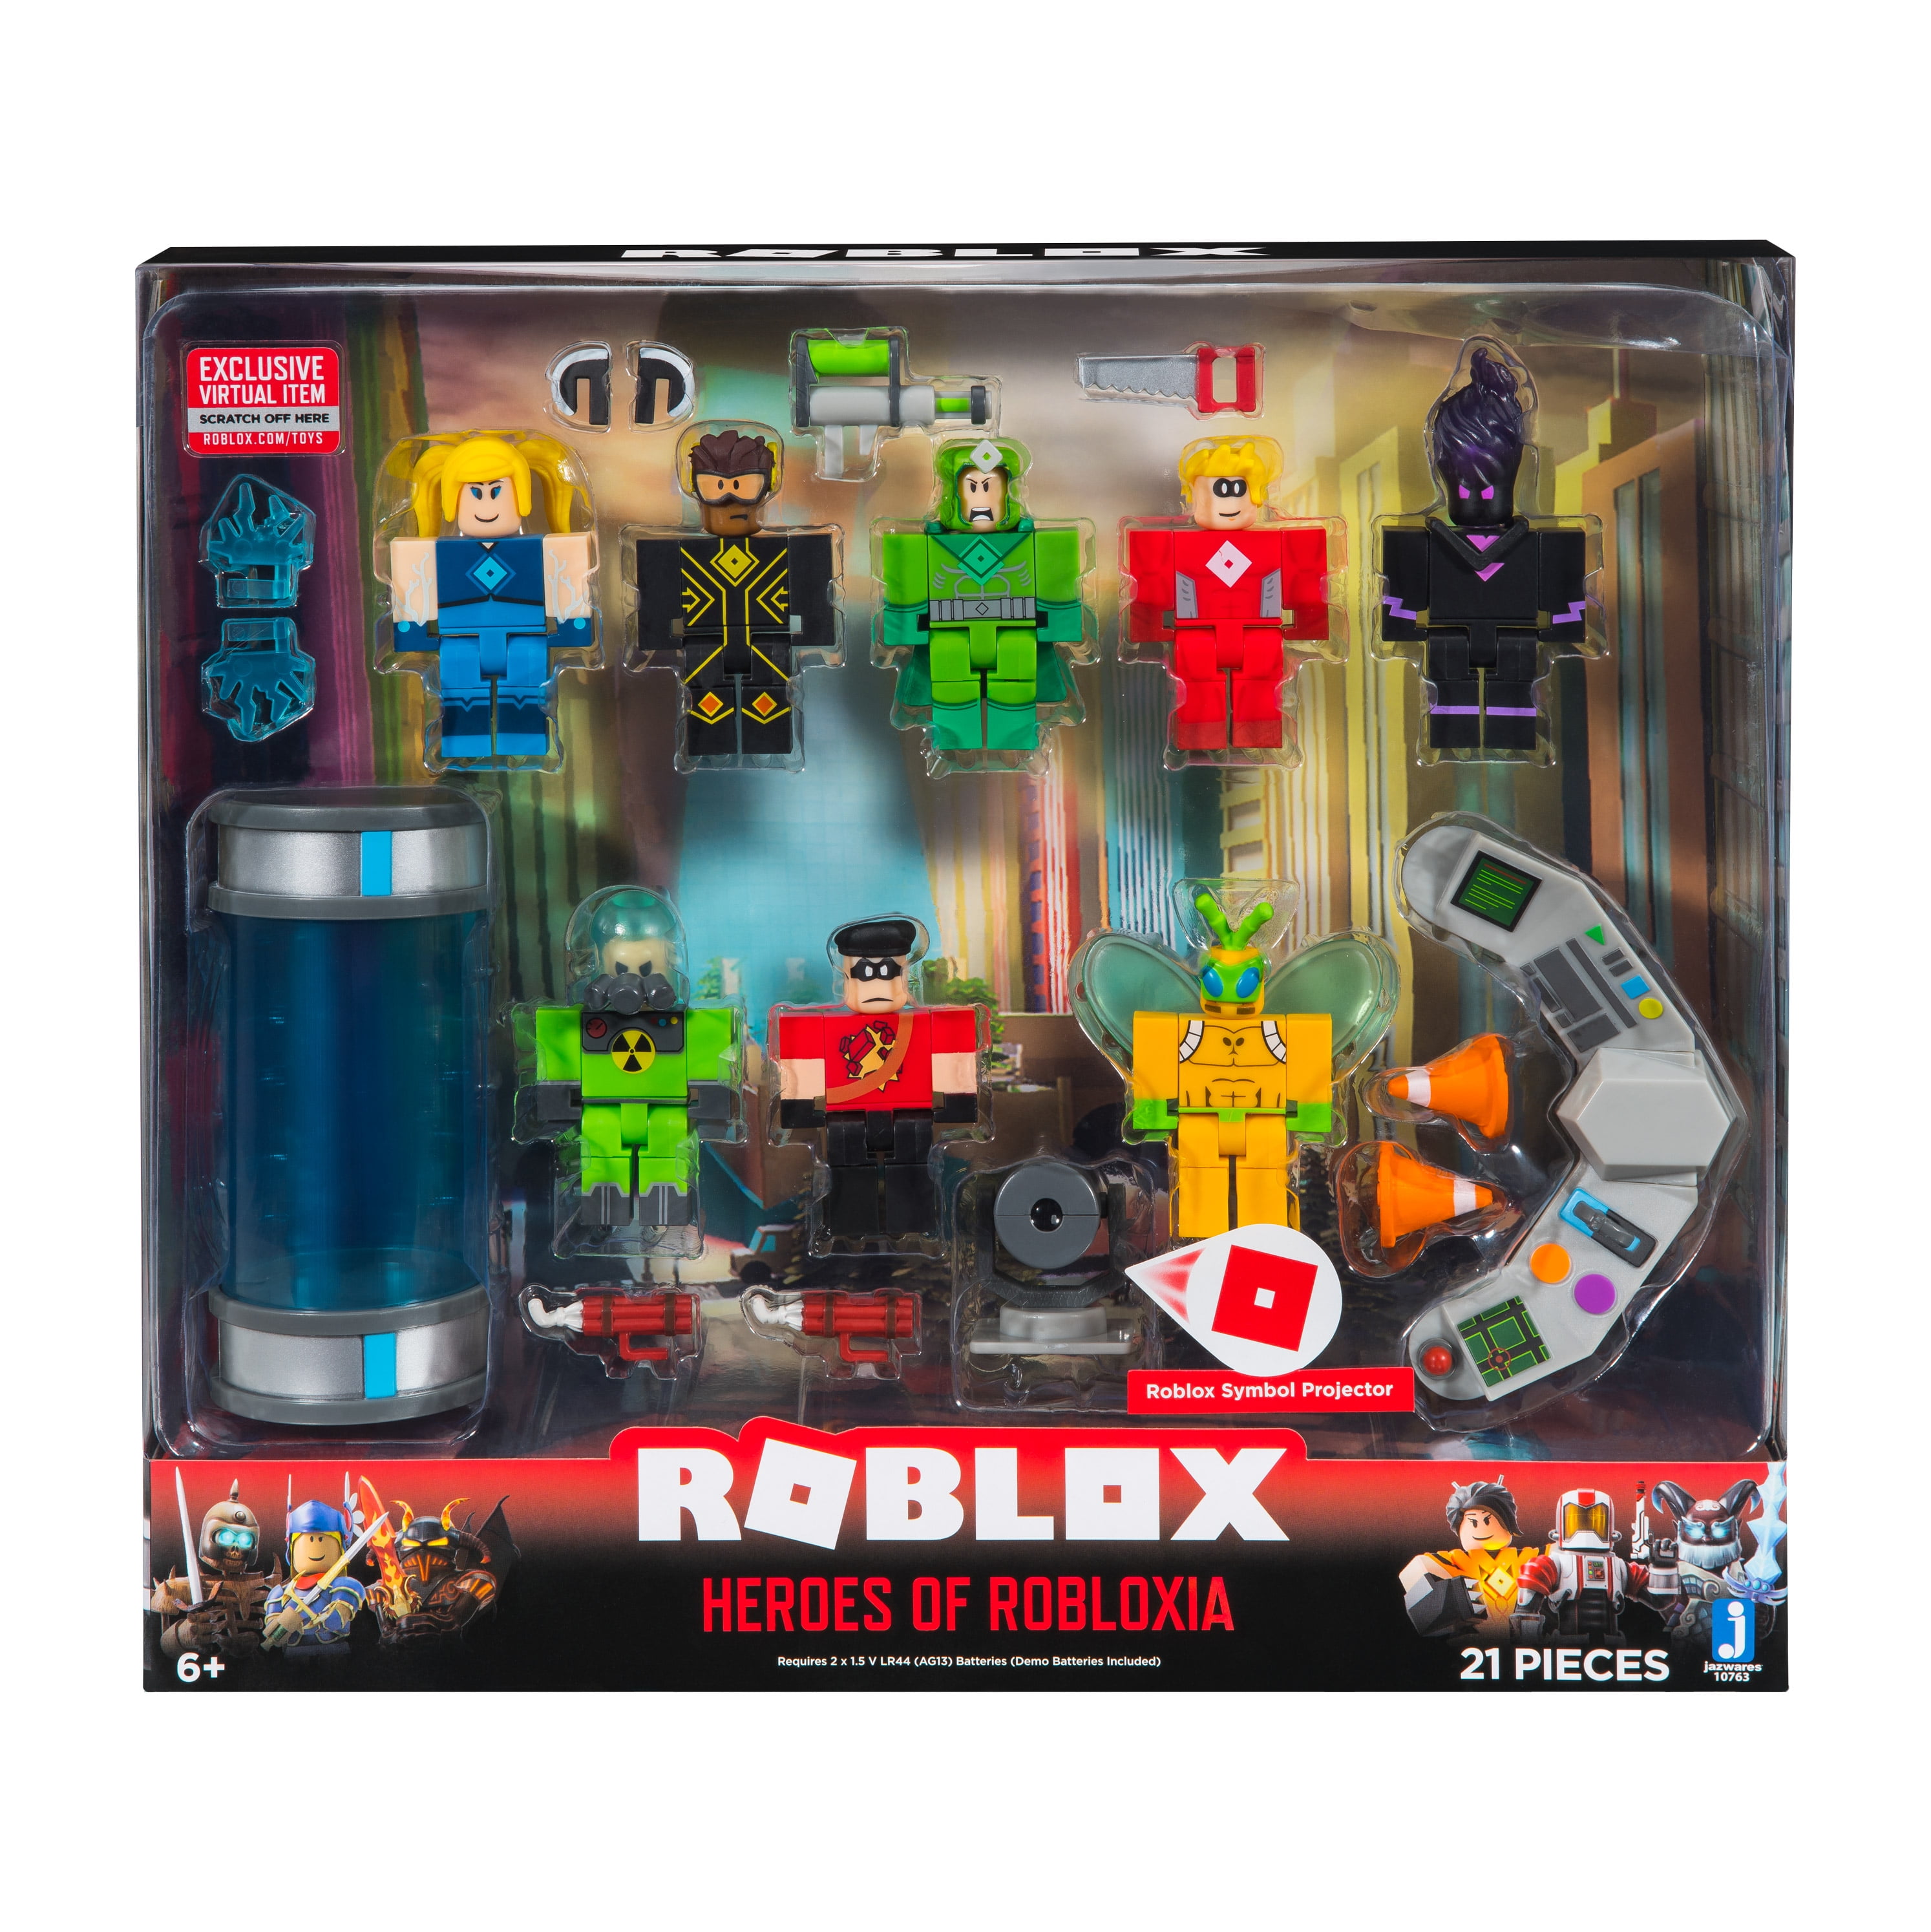 Roblox Heroes Of Robloxia Feature Playset Walmartcom - action figures tv movie video games roblox citizen of